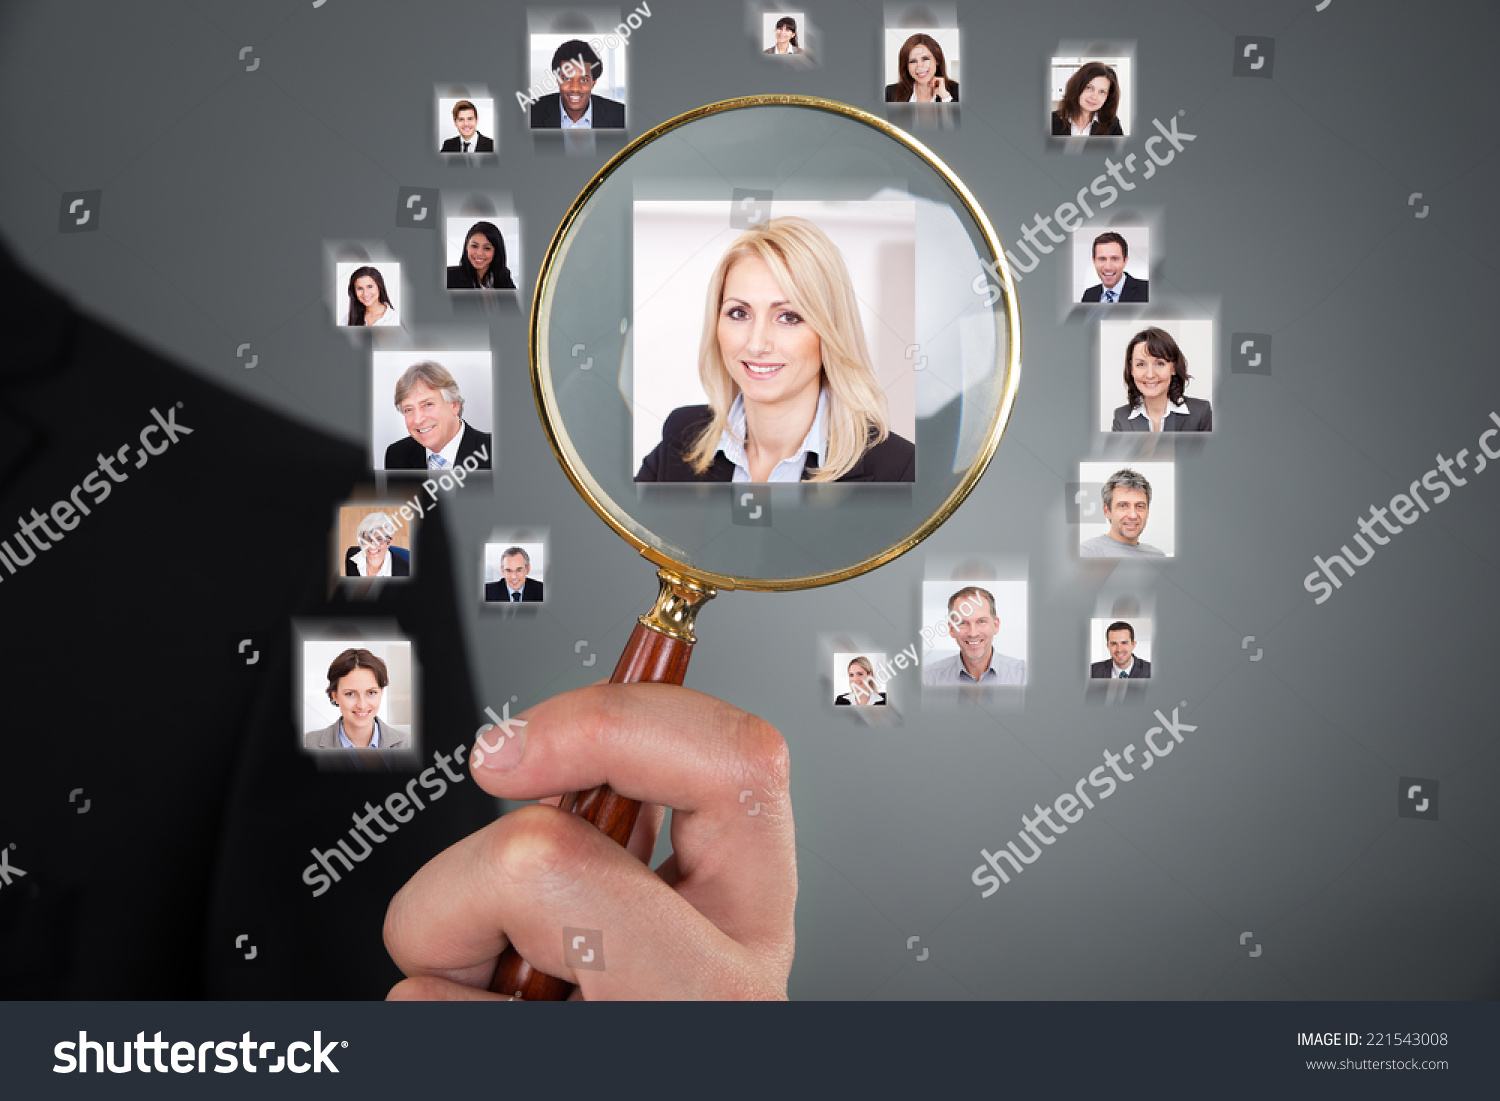 Cropped image of businessman searching candidate with magnifying glass over gray background #221543008